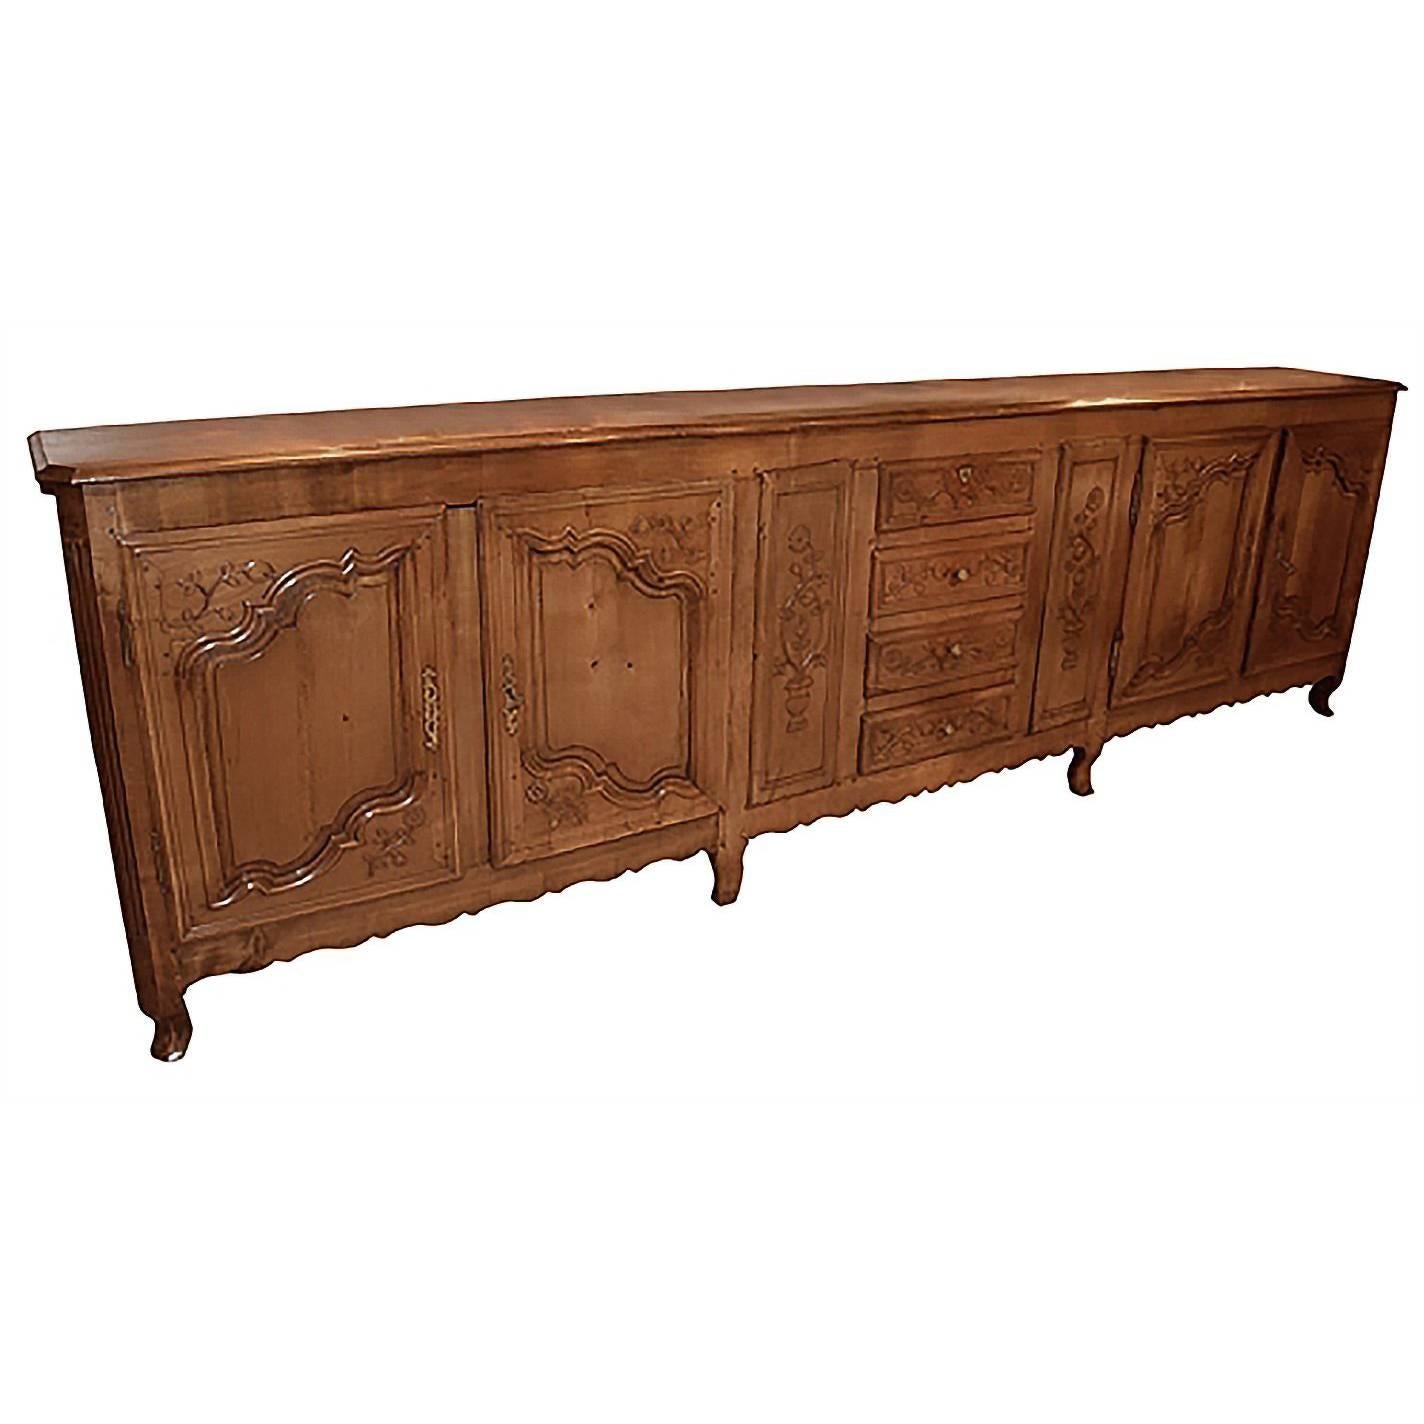 Mid-19th Century Picardy Fruitwood Buffet For Sale